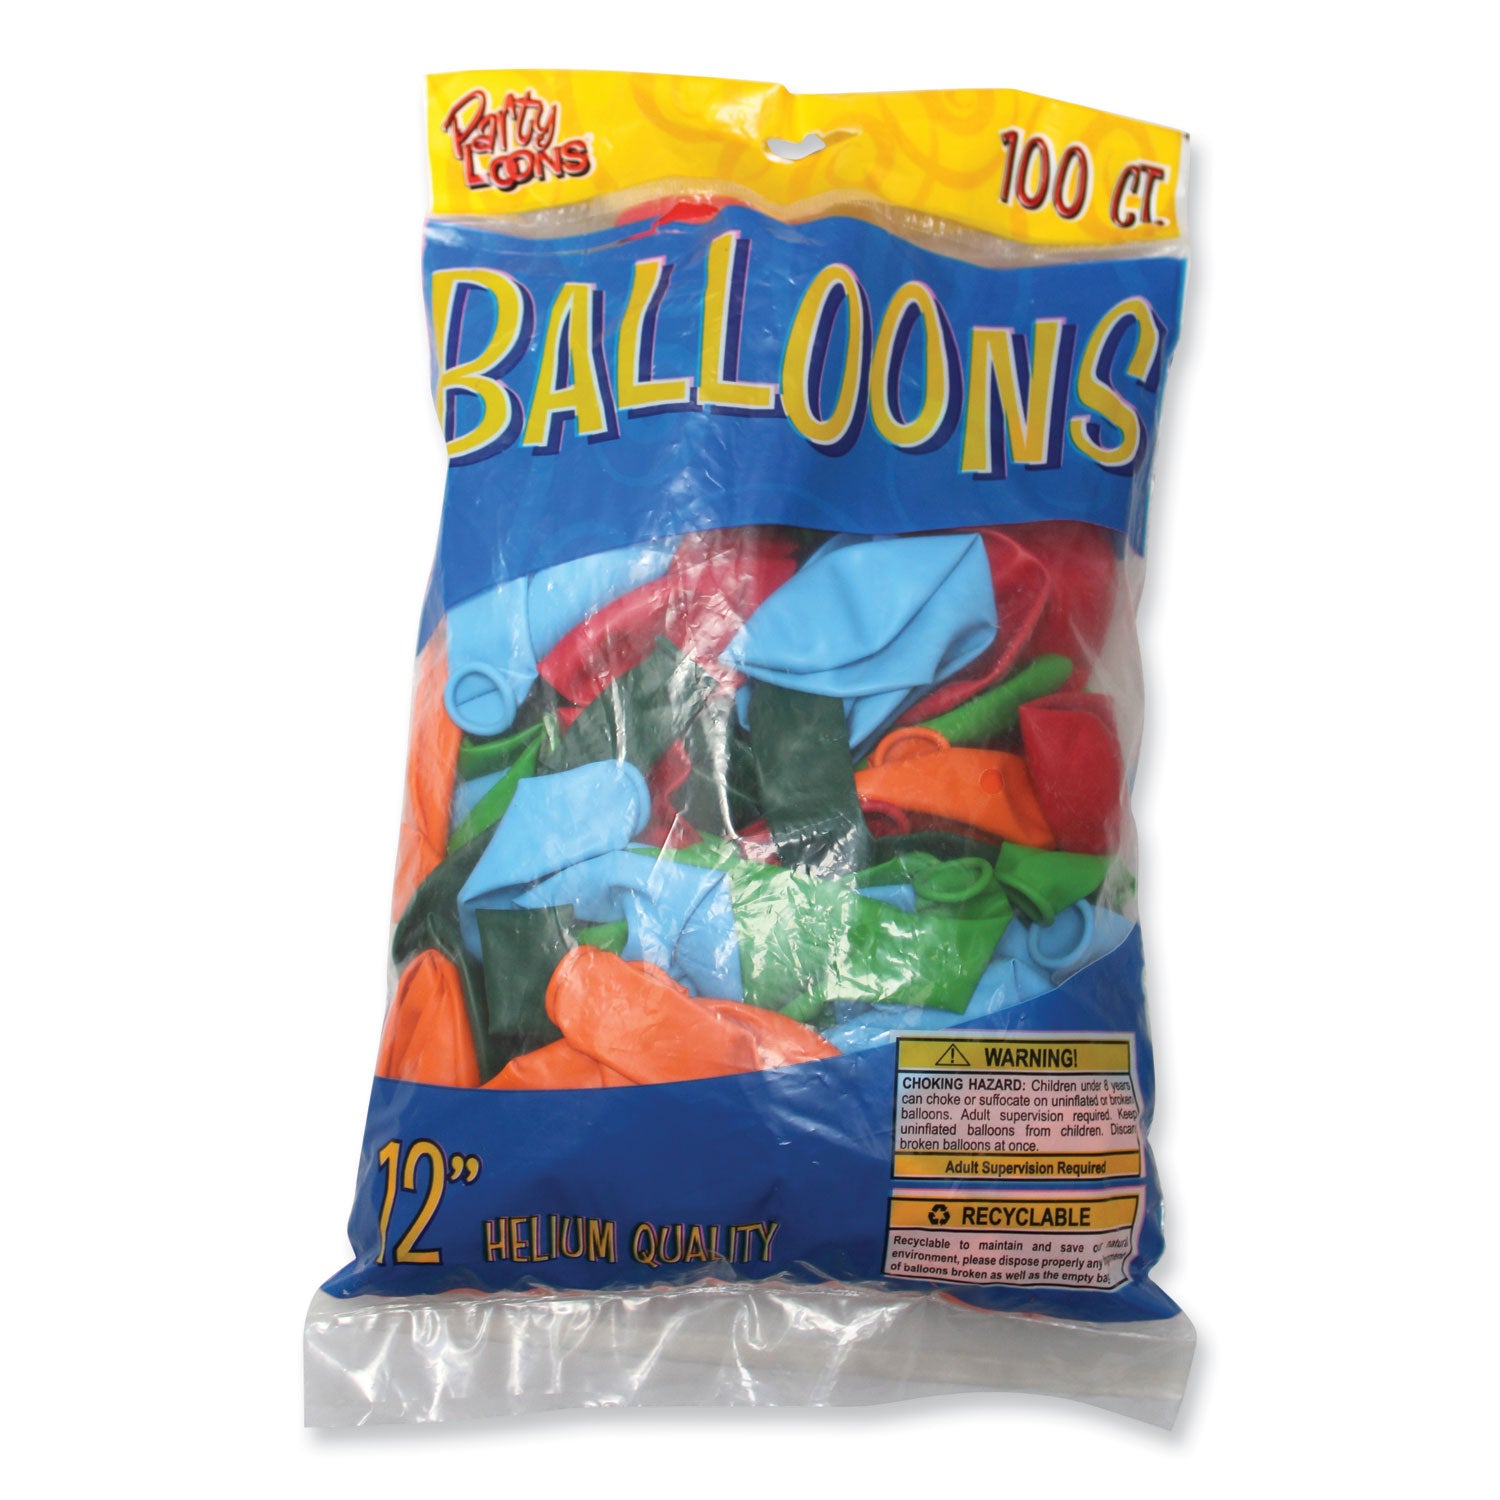 balloons-12-helium-quality-latex-assorted-colors-100-pack-20-packs-carton_tbl916100 - 1